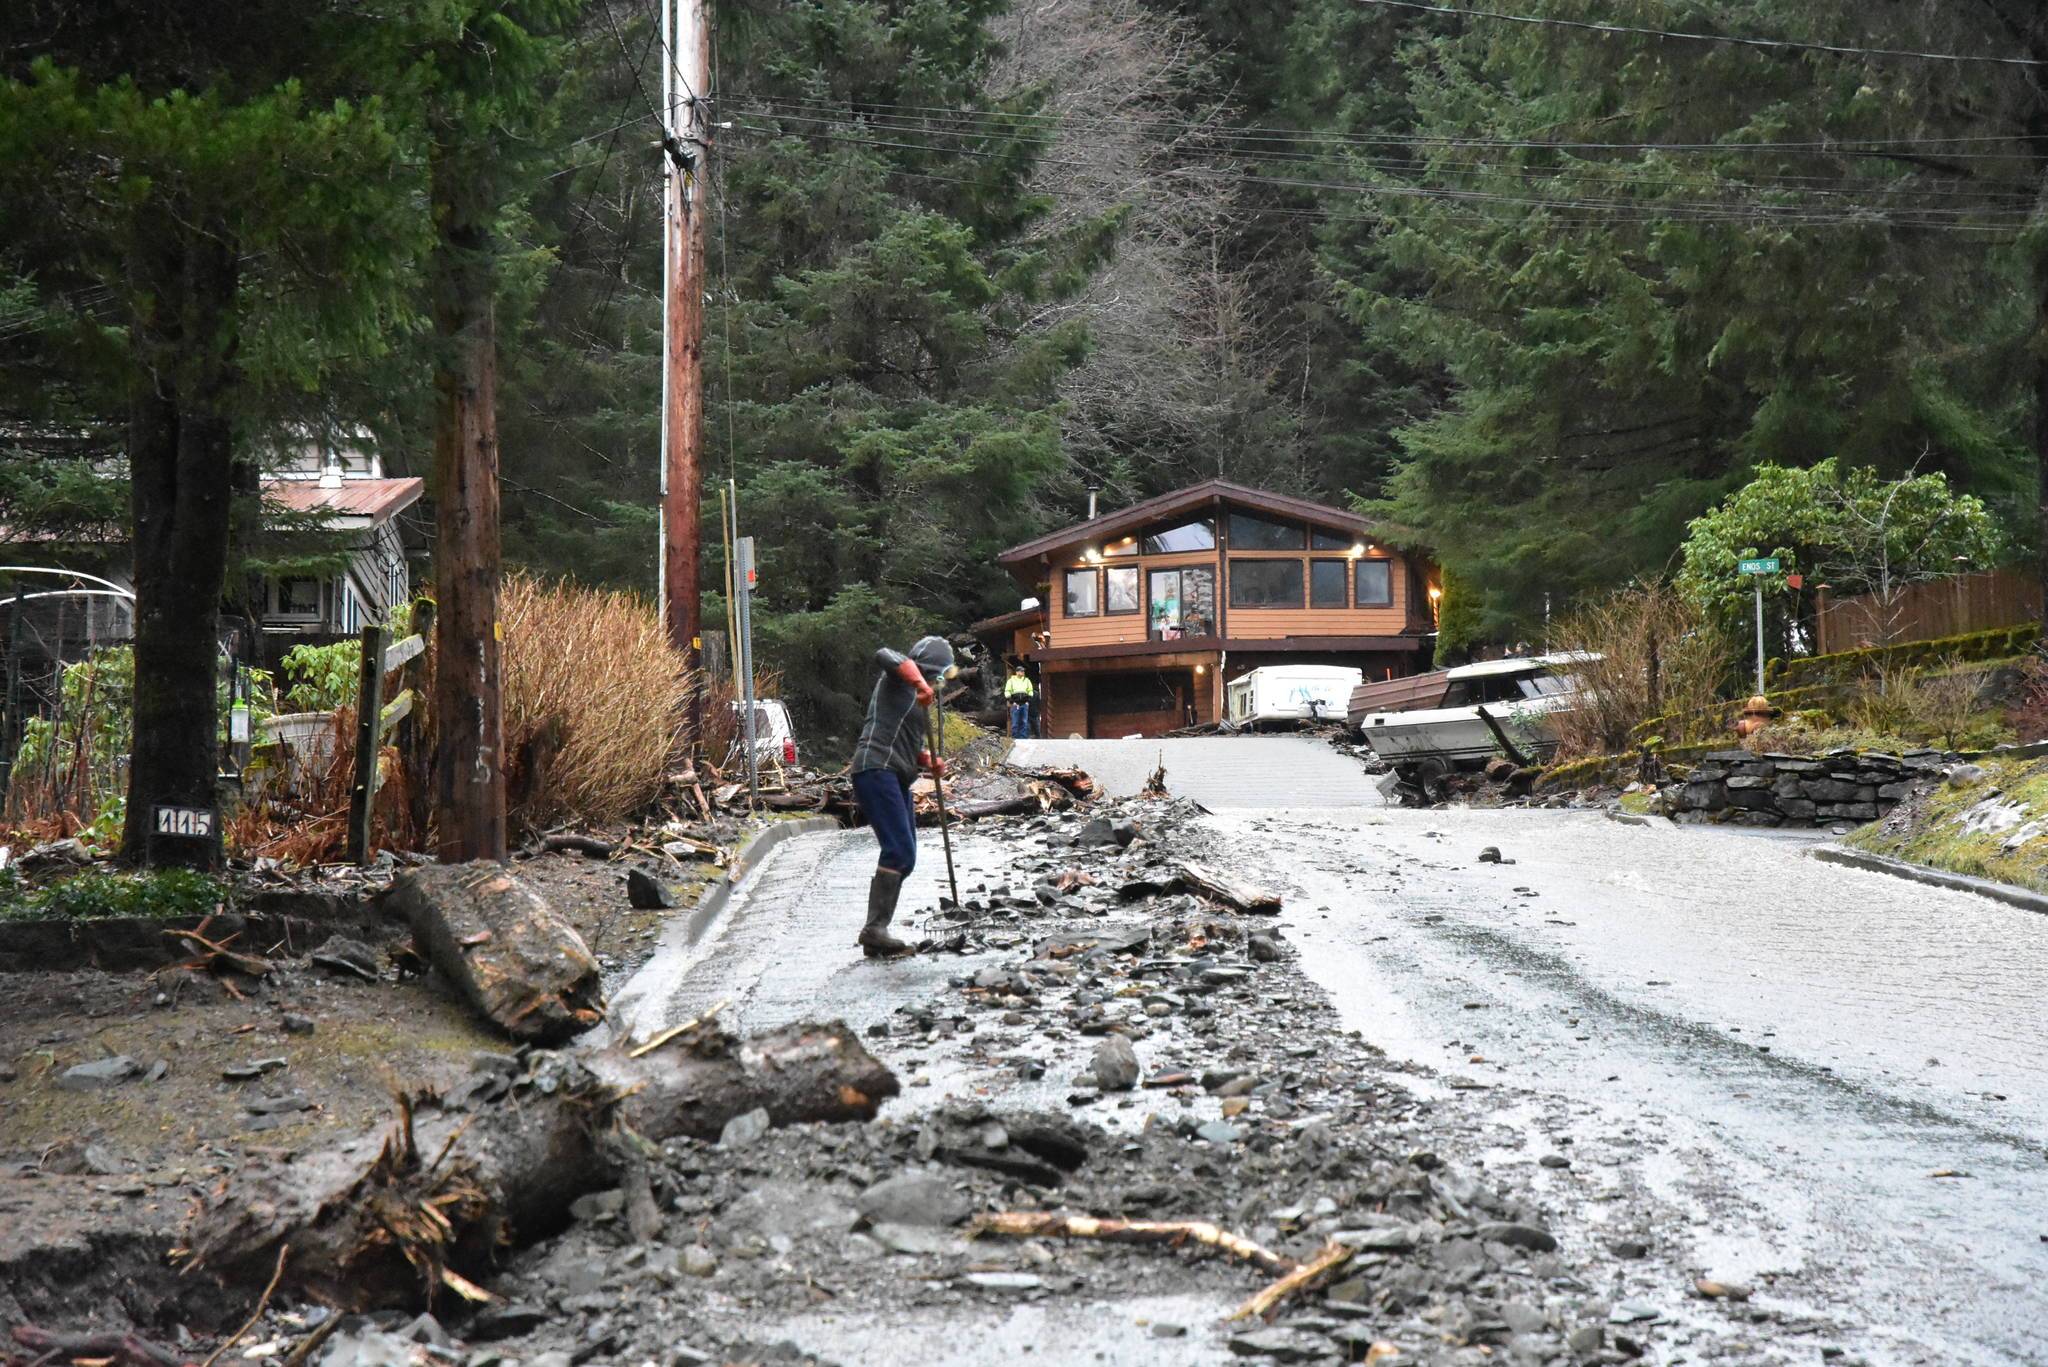 A mudslide at the top of Wire Street near Twin Lakes washed rocks, mud and a boat down the road, forcing the closure of the street. (Peter Segall / Juneau Empire)